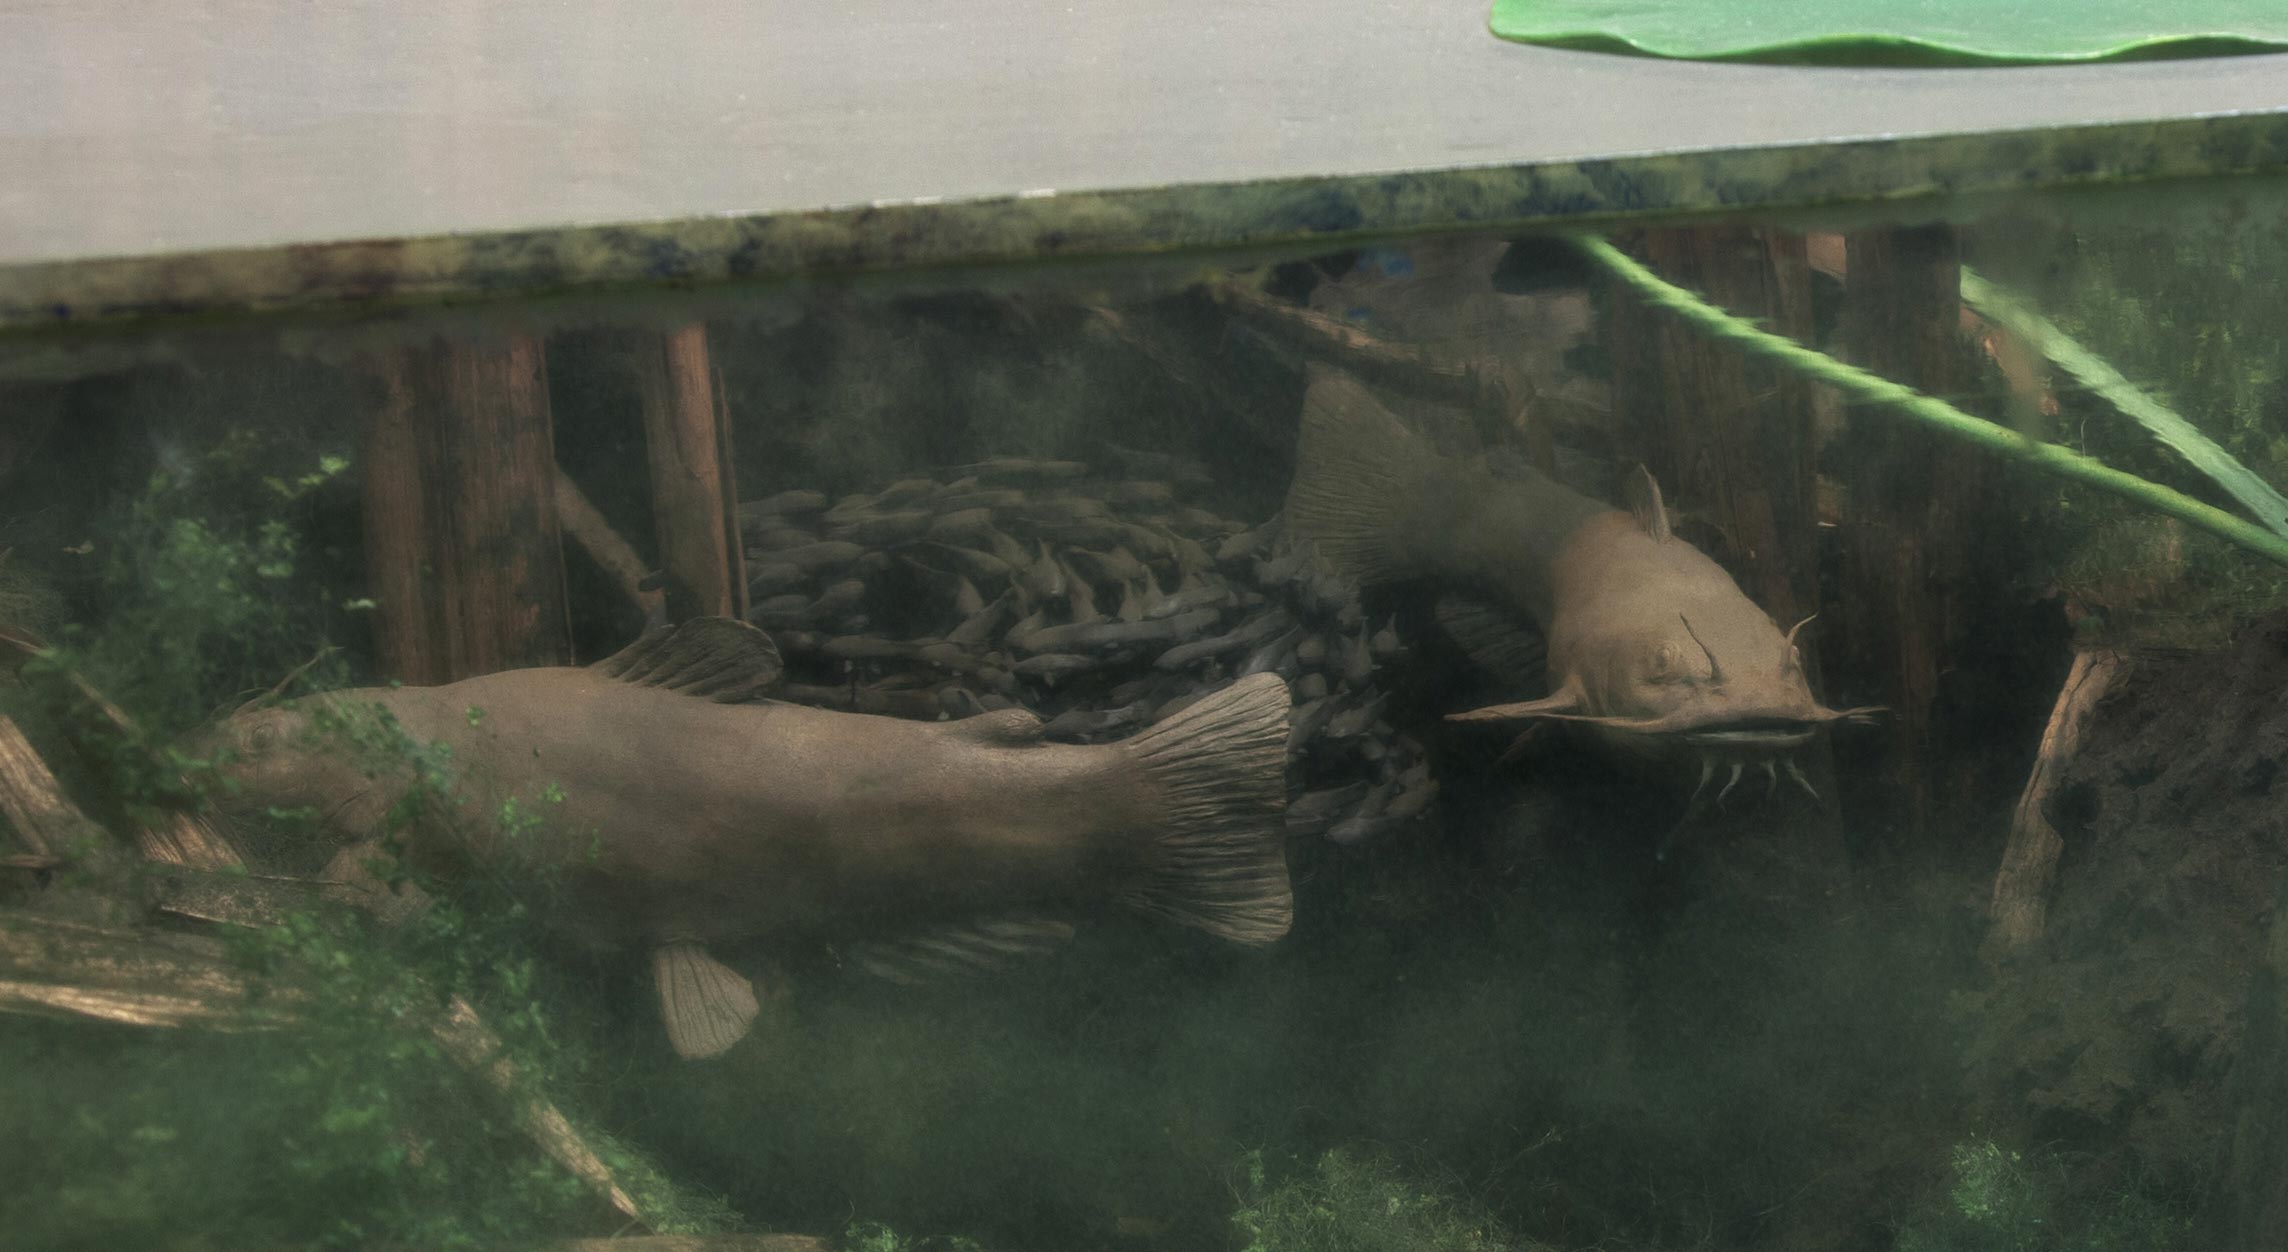 Section of a diorama showing a cross-section of a lake with several brown bullhead catfish in it.